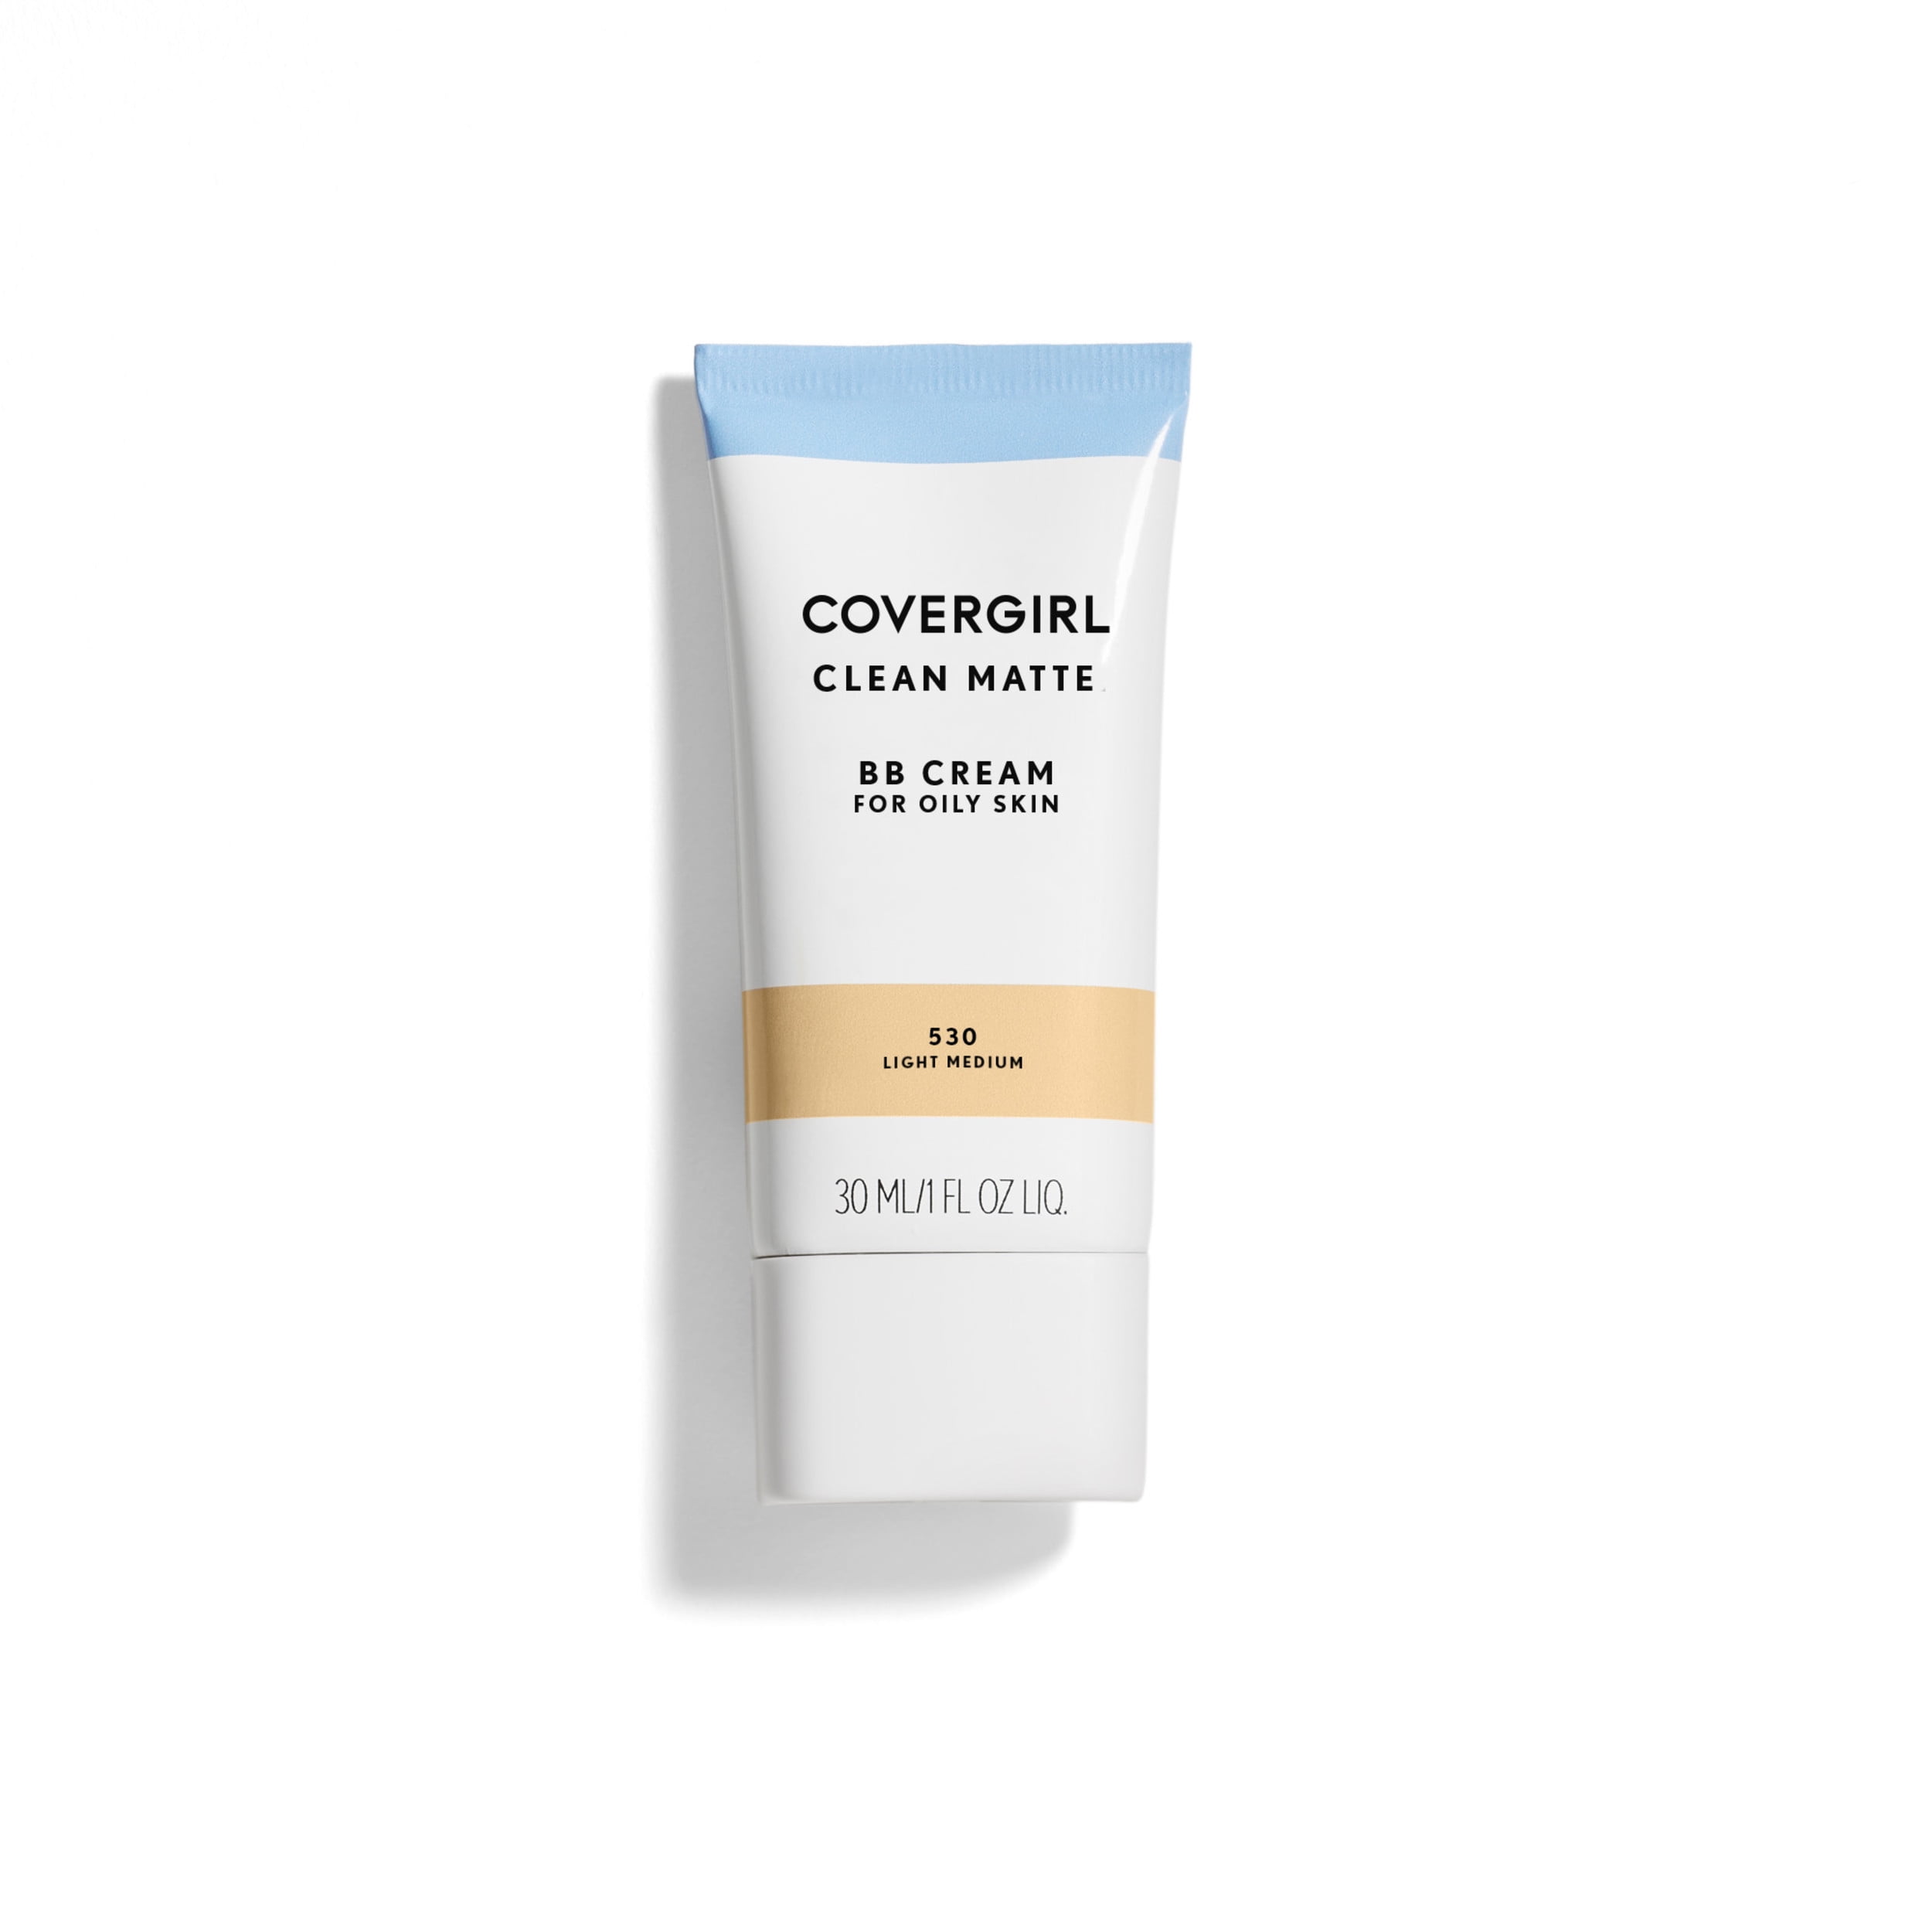 COVERGIRL Clean Matte BB Cream For Oily Skin, 530 Light Medium, 1 fl oz, Oil-Free Finish BB Cream, BB Cream Foundation, No Clogged Pores, Evens Skin Tone and Hides Blemishes, Water Based Foundation